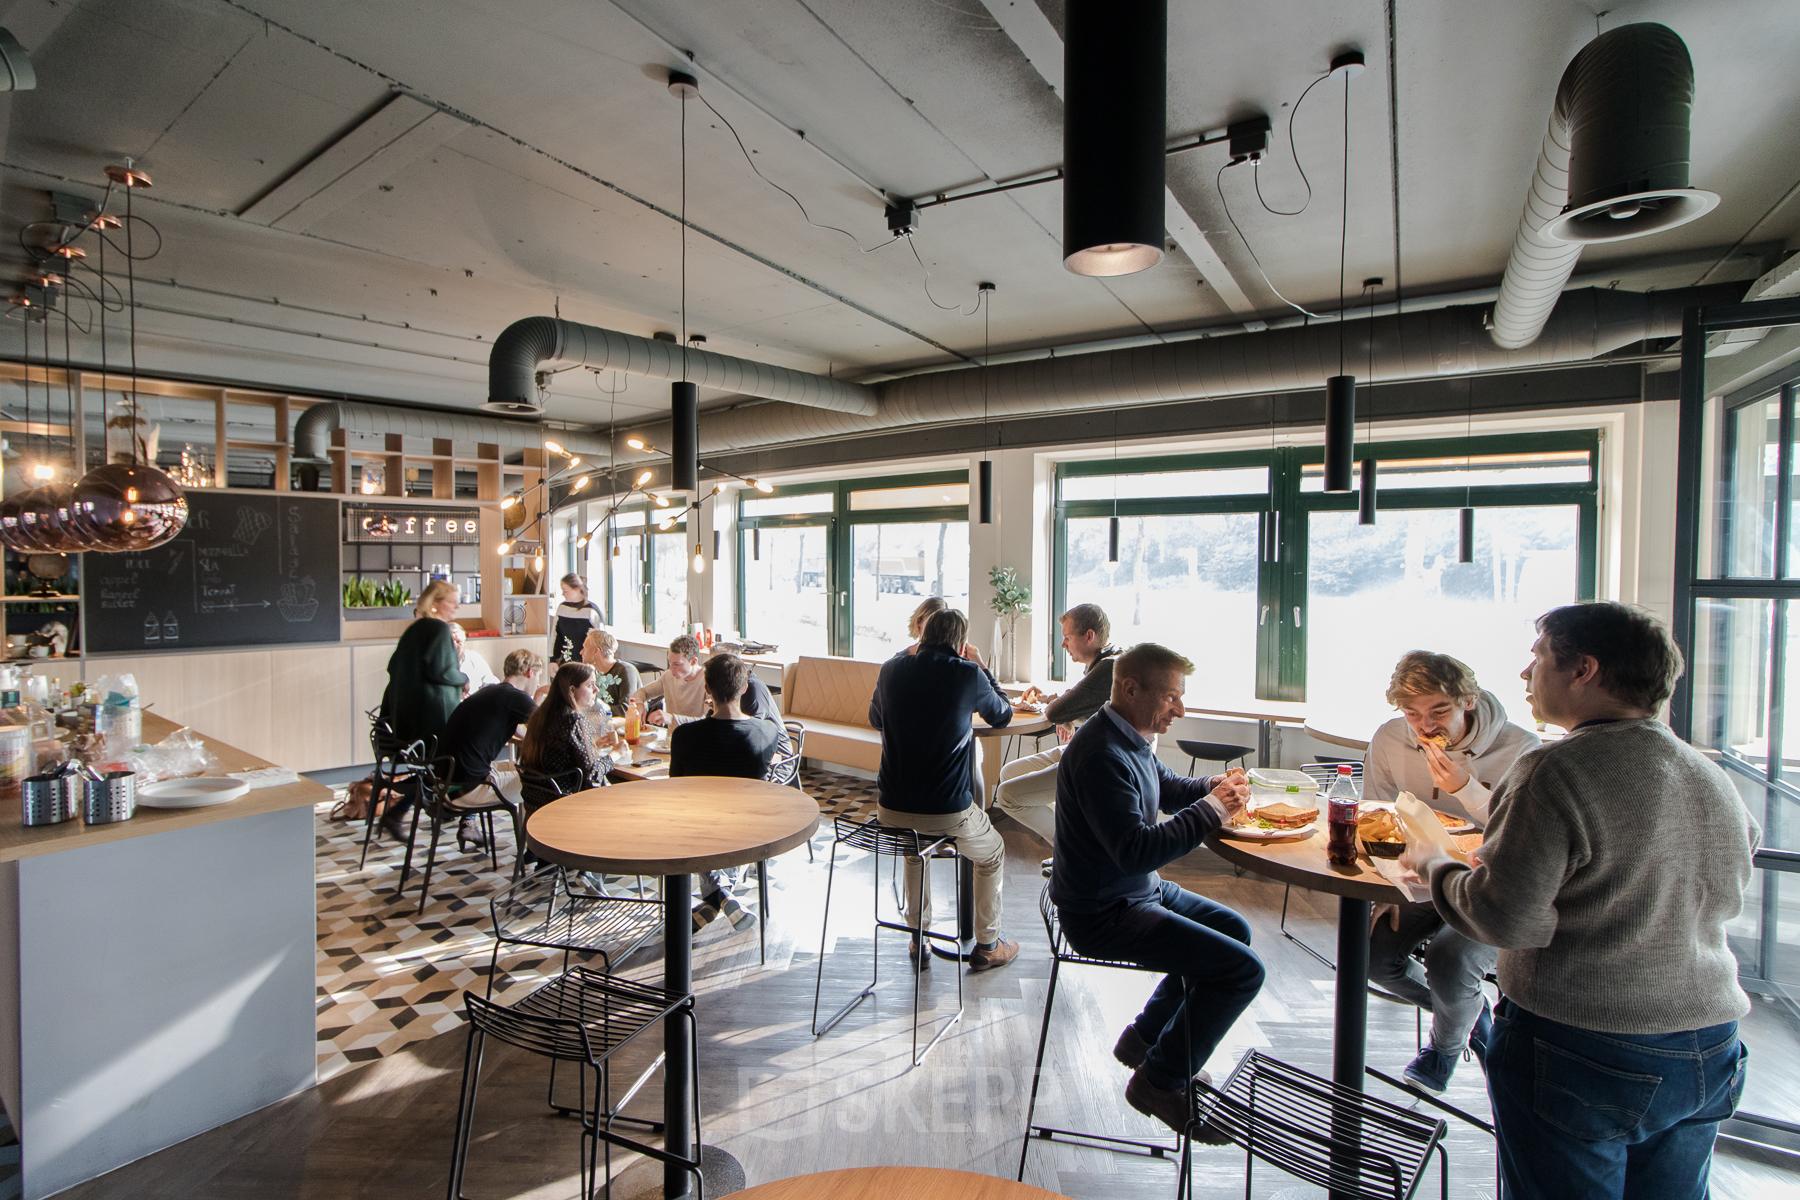 Modern and welcoming office space rental at Hanzelaan 351-361, near Zwolle Centraal Station, with people engaged in casual business lunches.